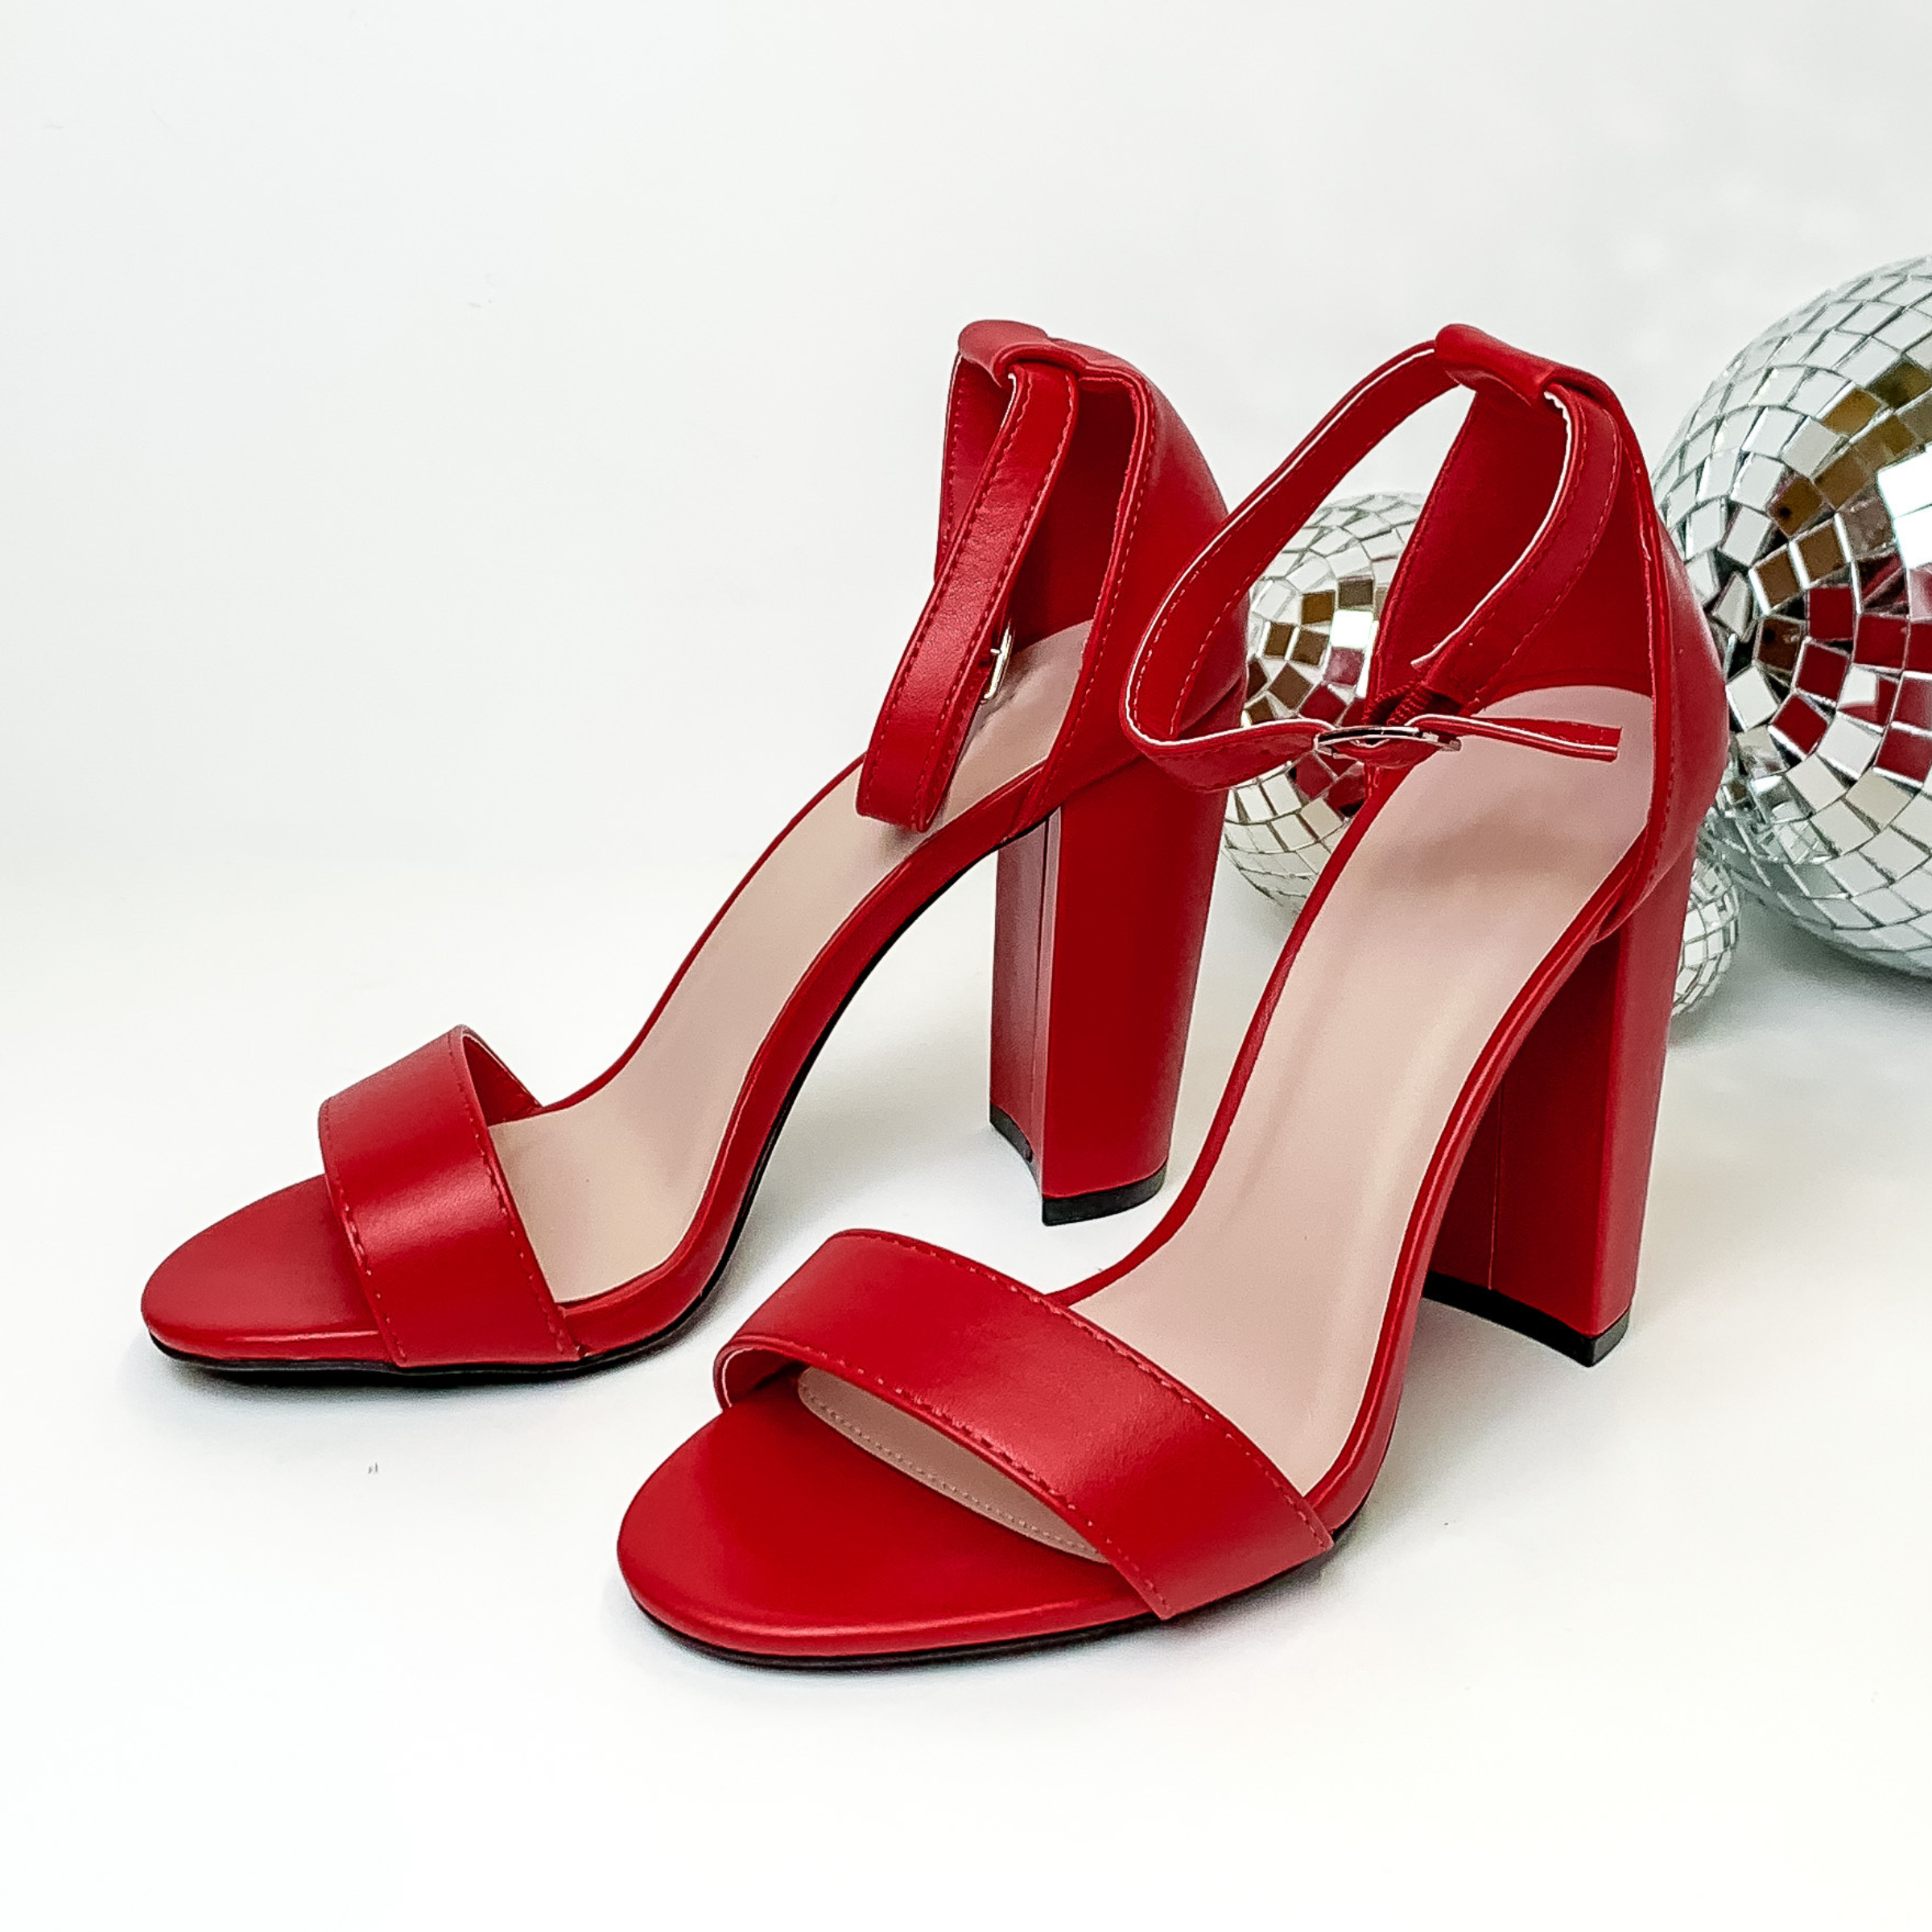 Red Heels: Buy Red Heels for Women Online at Low Prices - Snapdeal India